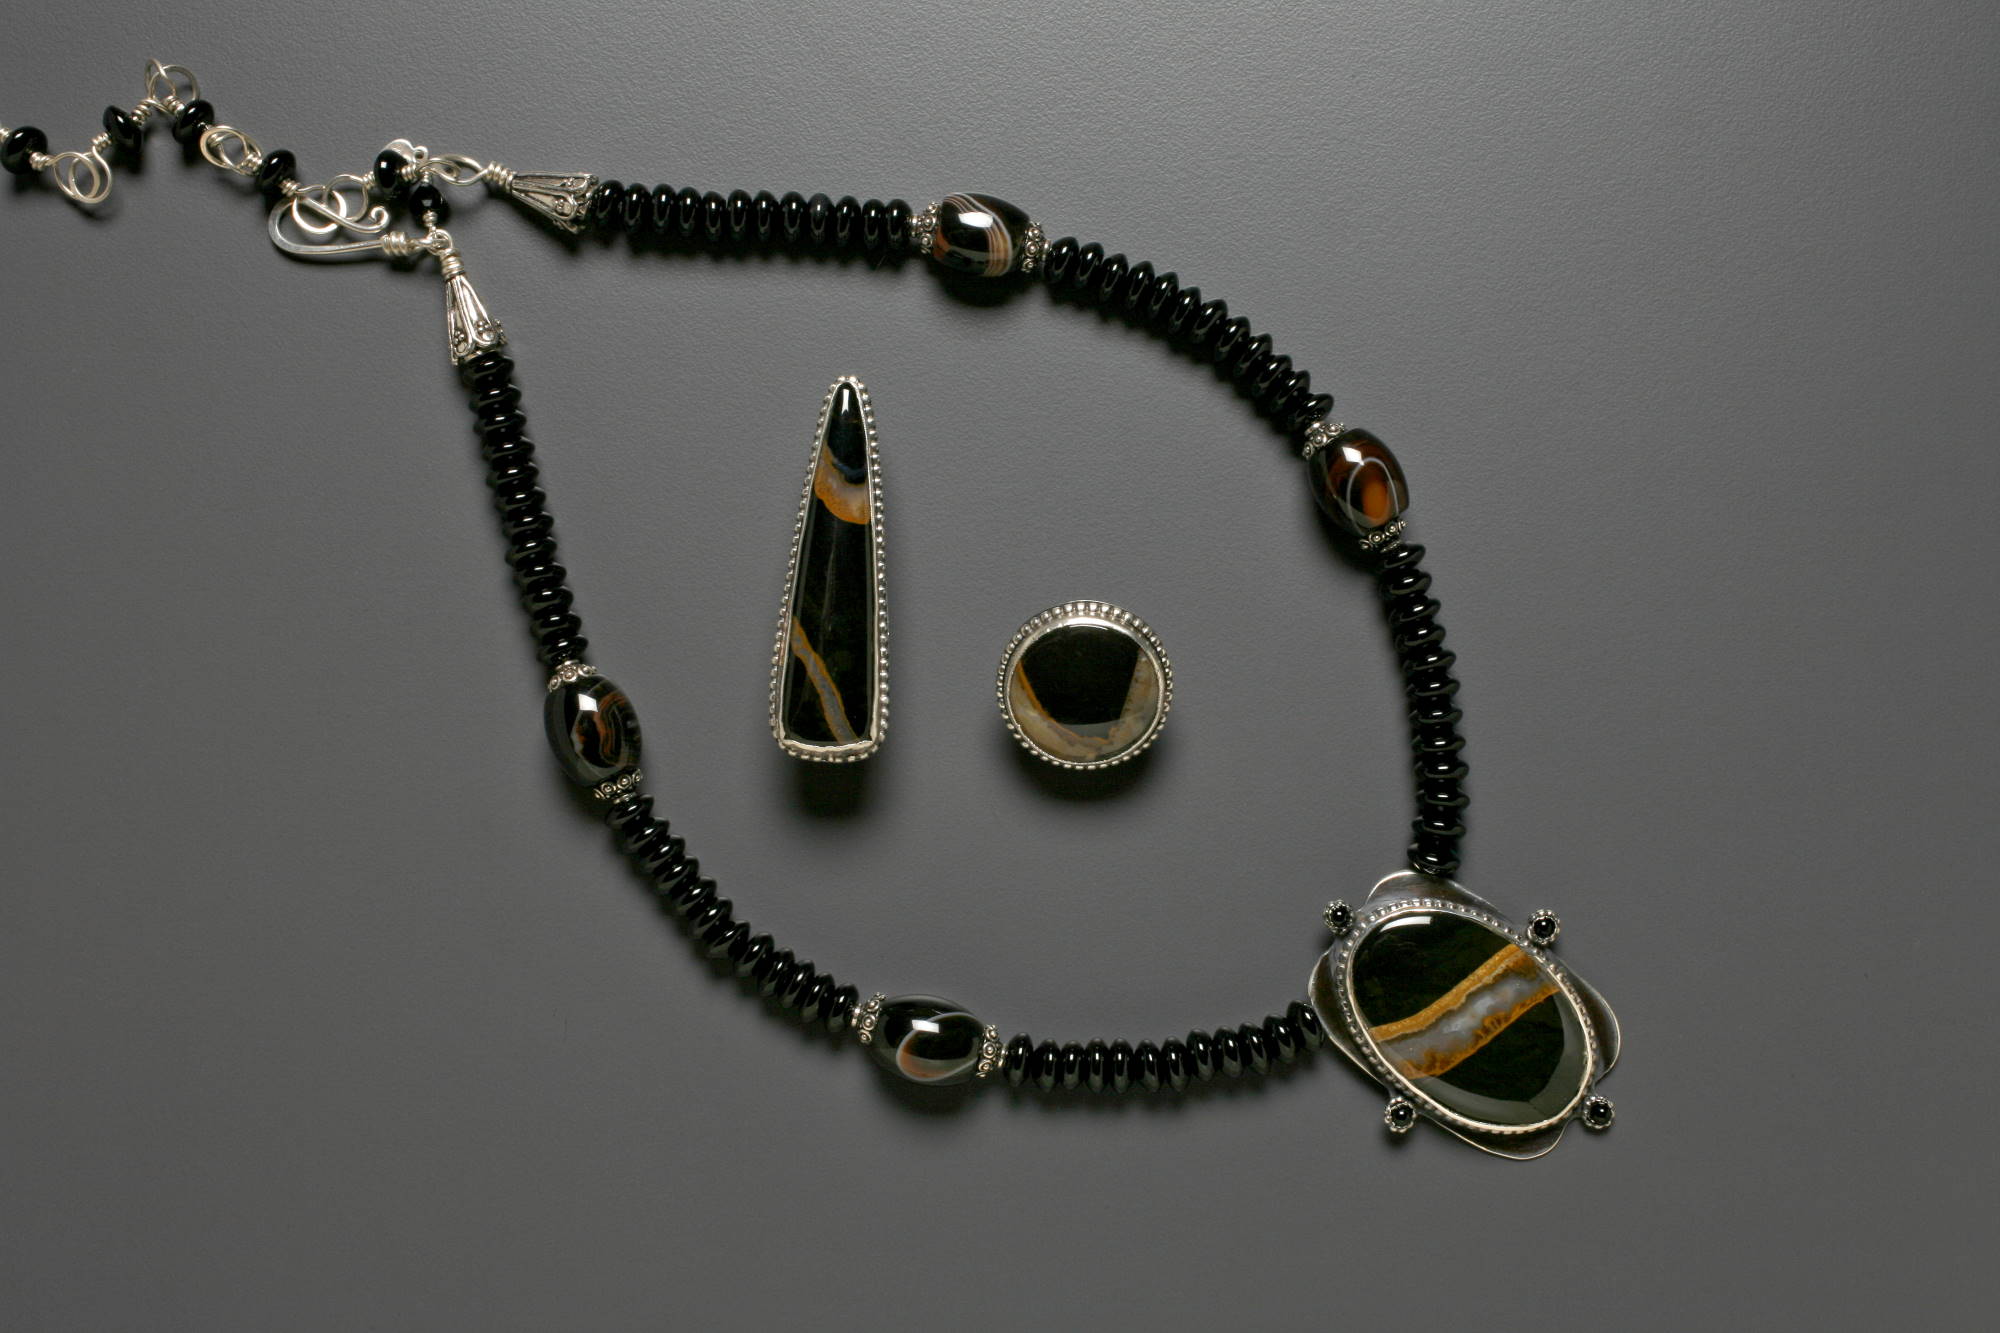 Detail of Montegrosso Jasper Necklace and Earrings